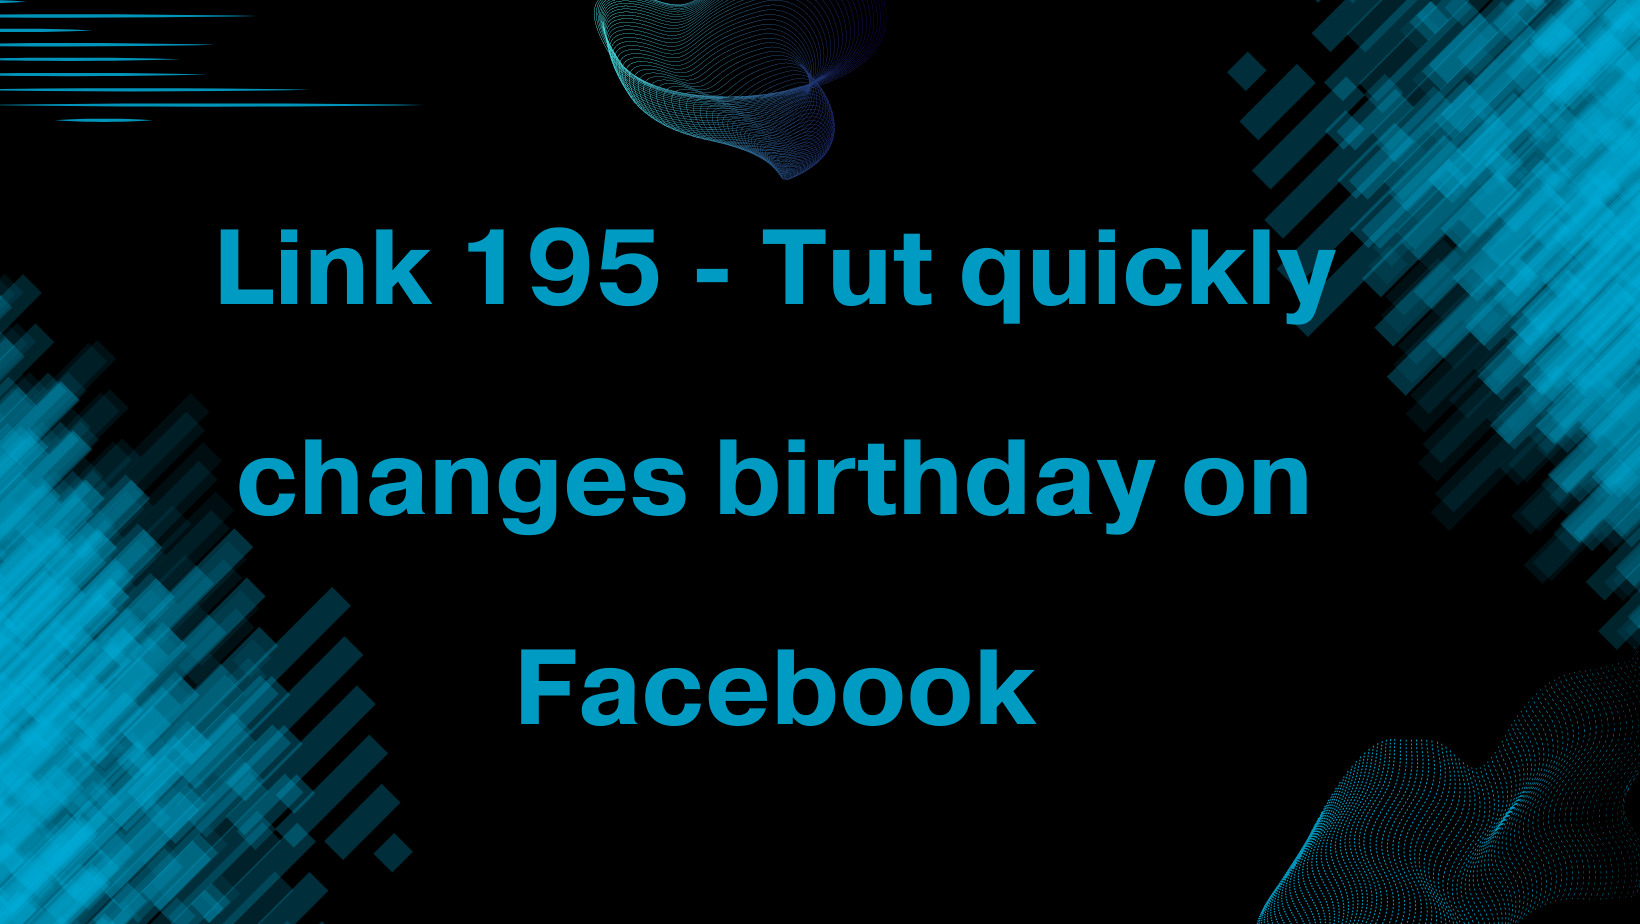 Link 195 - Tut quickly changes birthday on Facebook